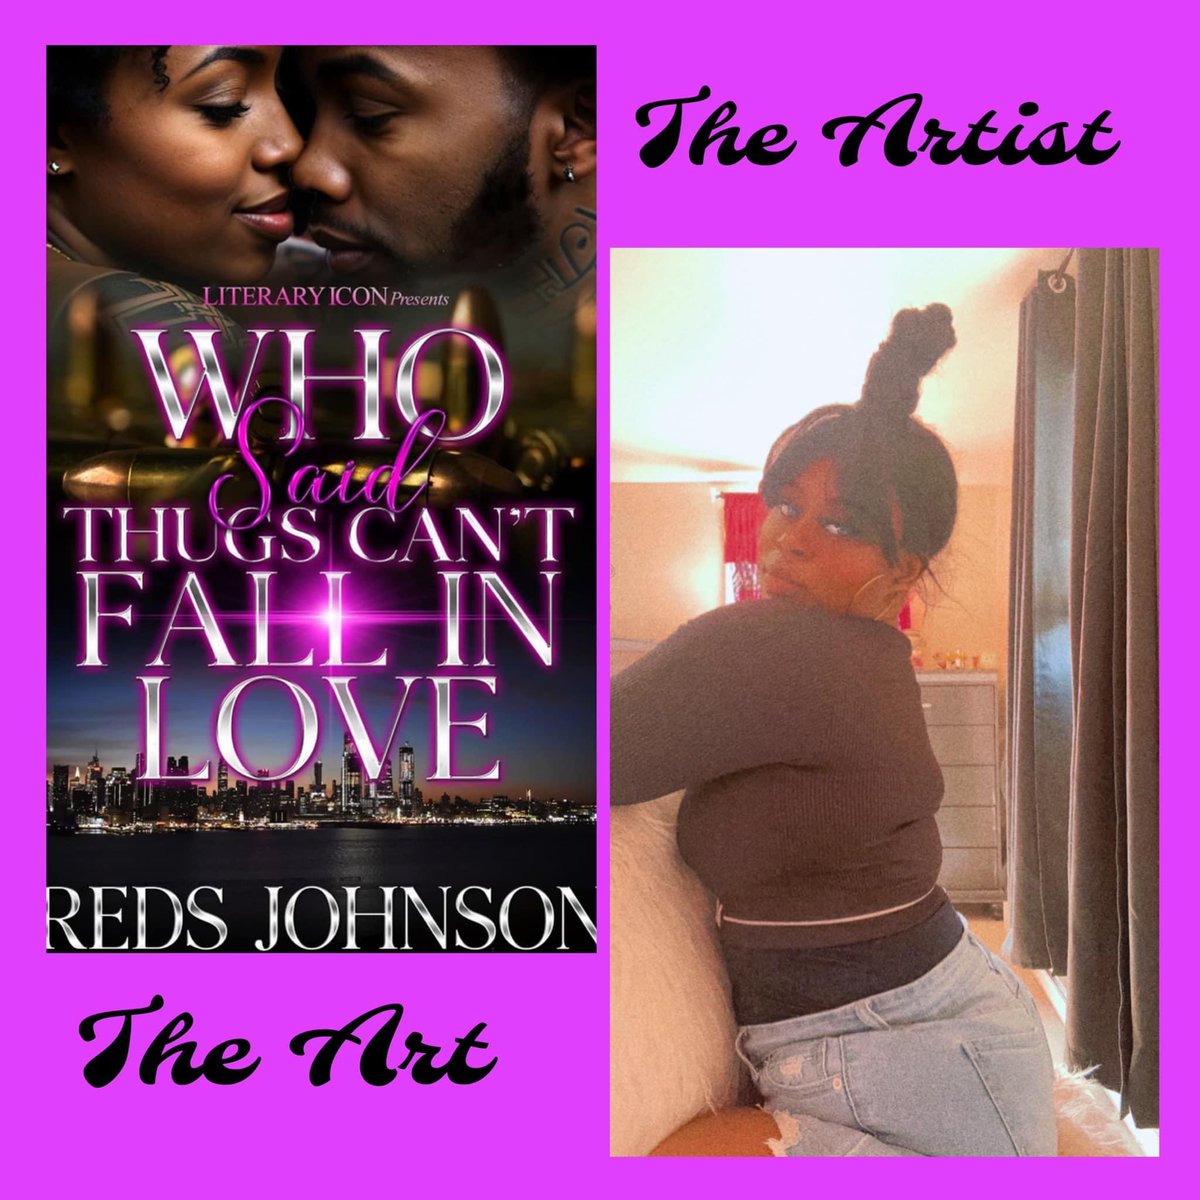 Check out newest release! amzn.to/46jLitC 

#NewRelease #UrbanFiction #kindlebooks #kindlereaders